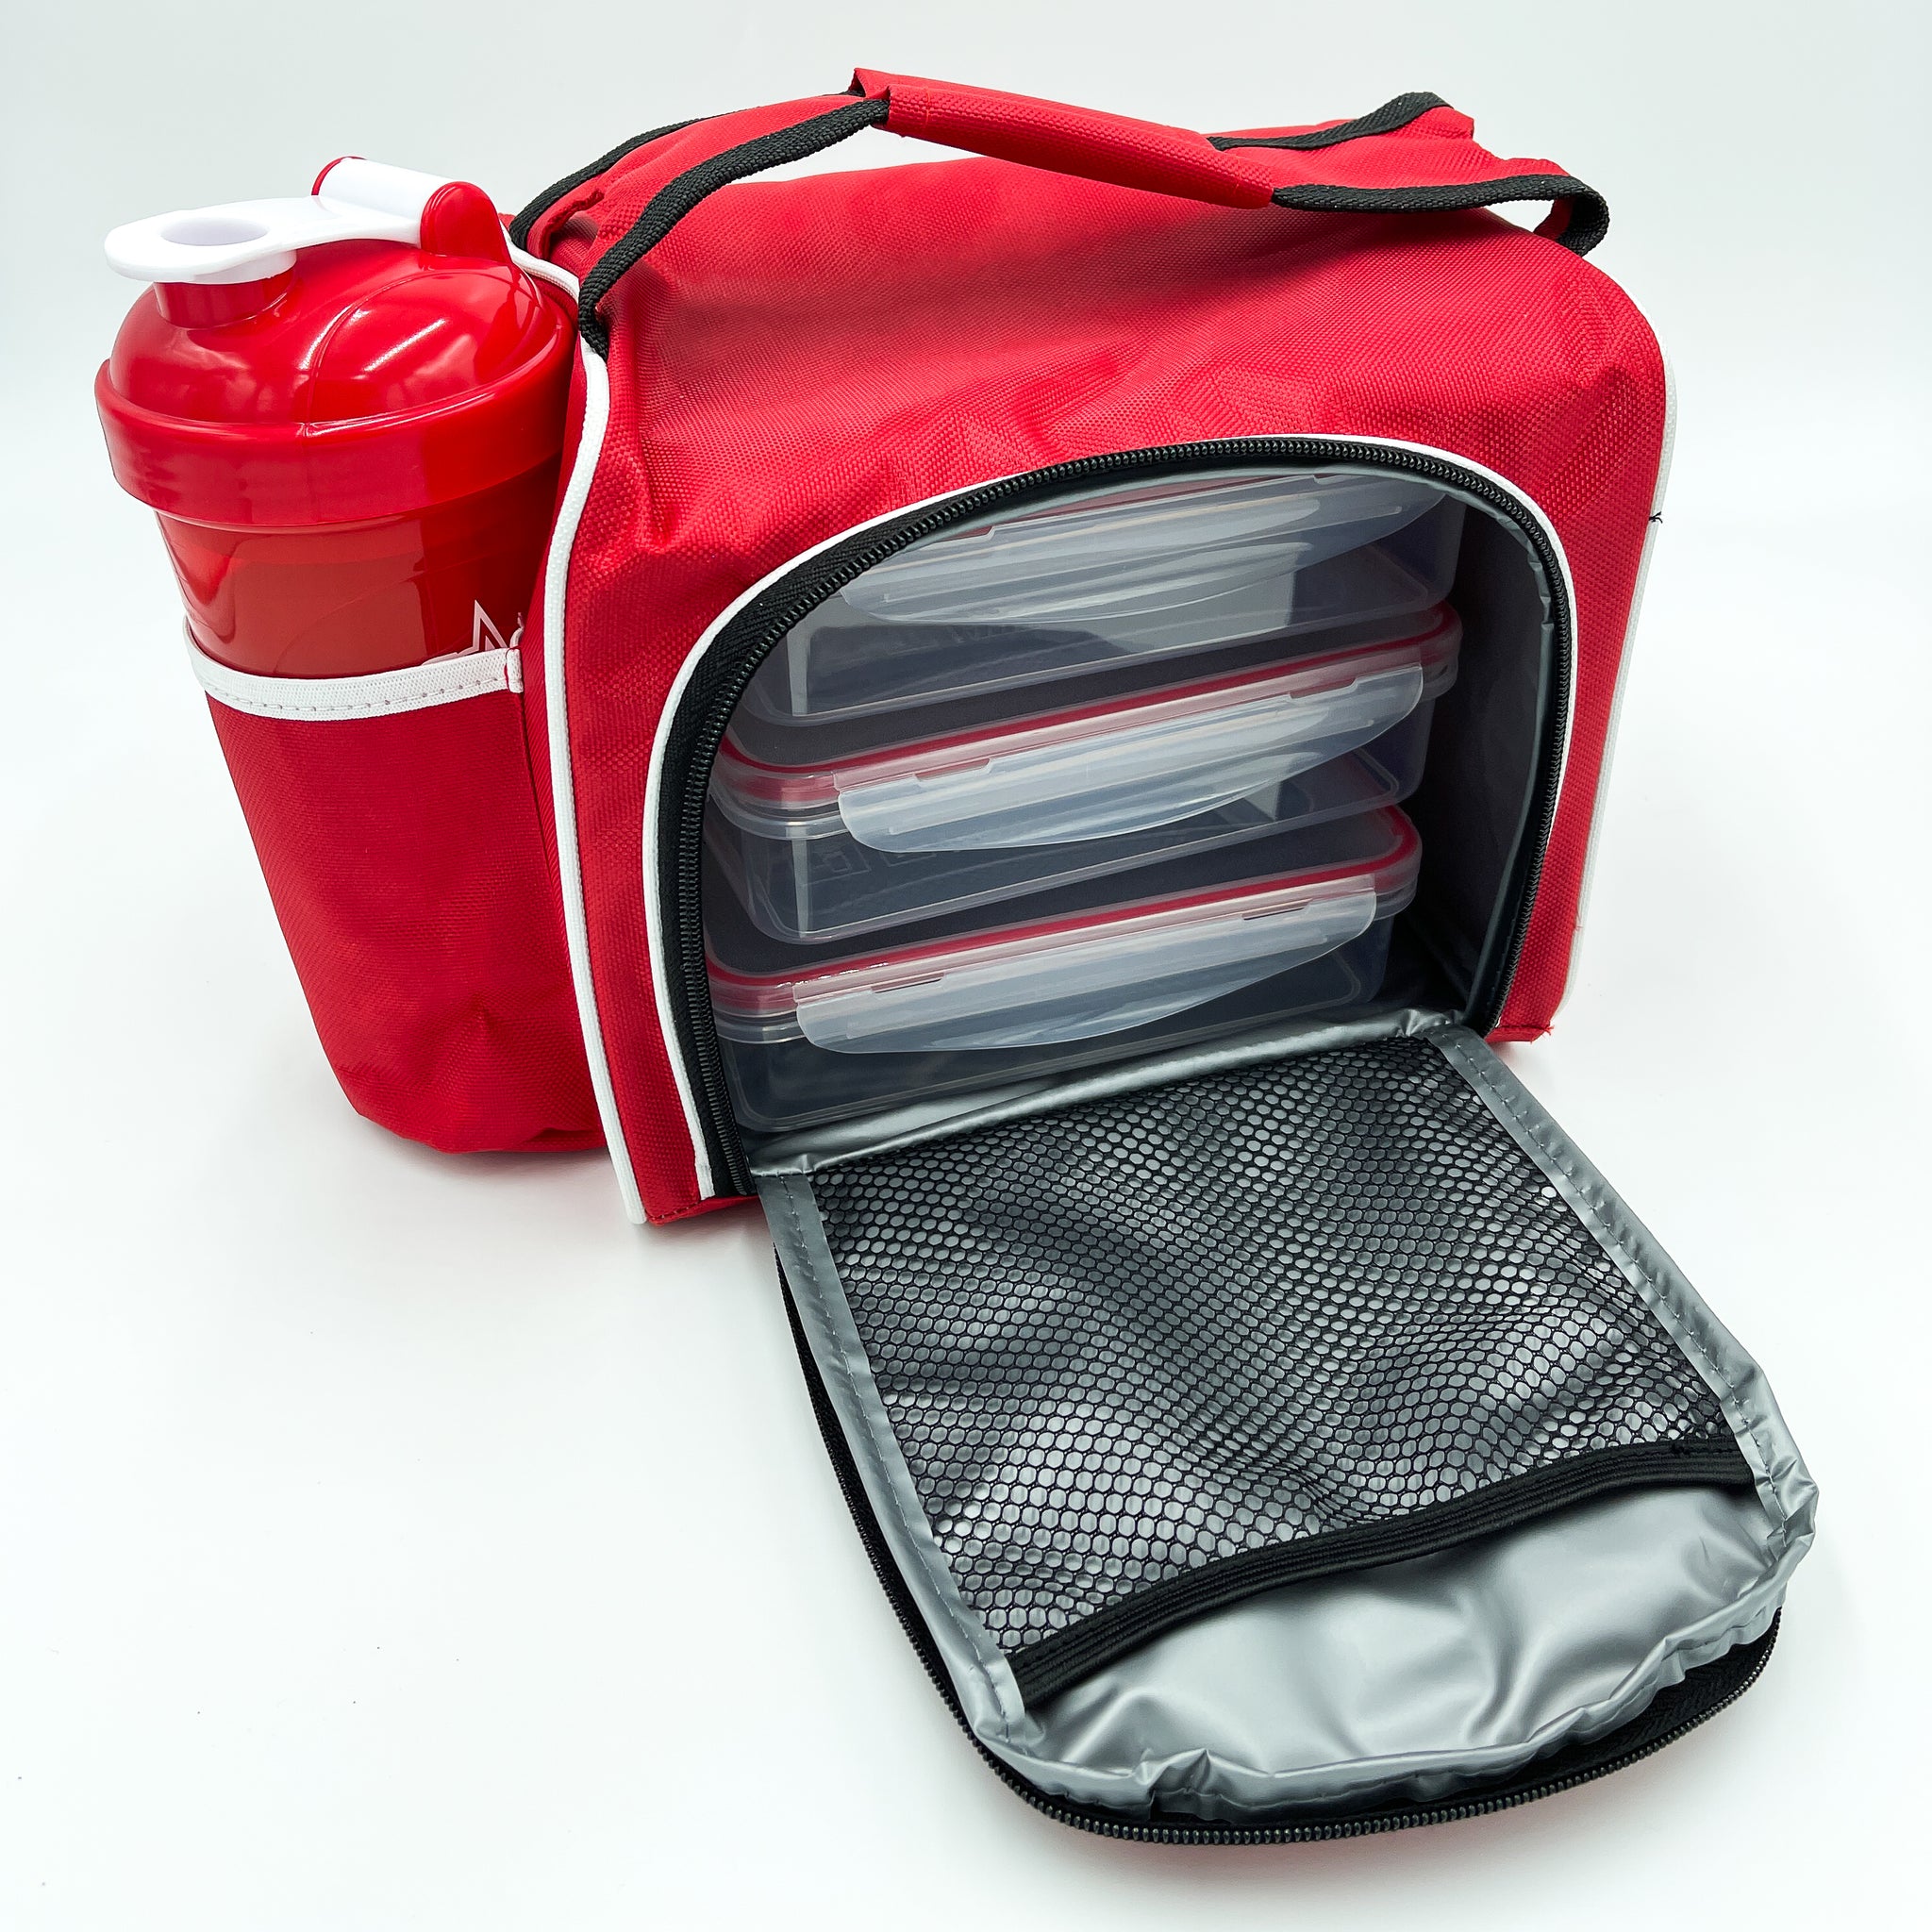 Meal Prep Bag (Built Prepared) by Nutrition Warehouse - Nutrition